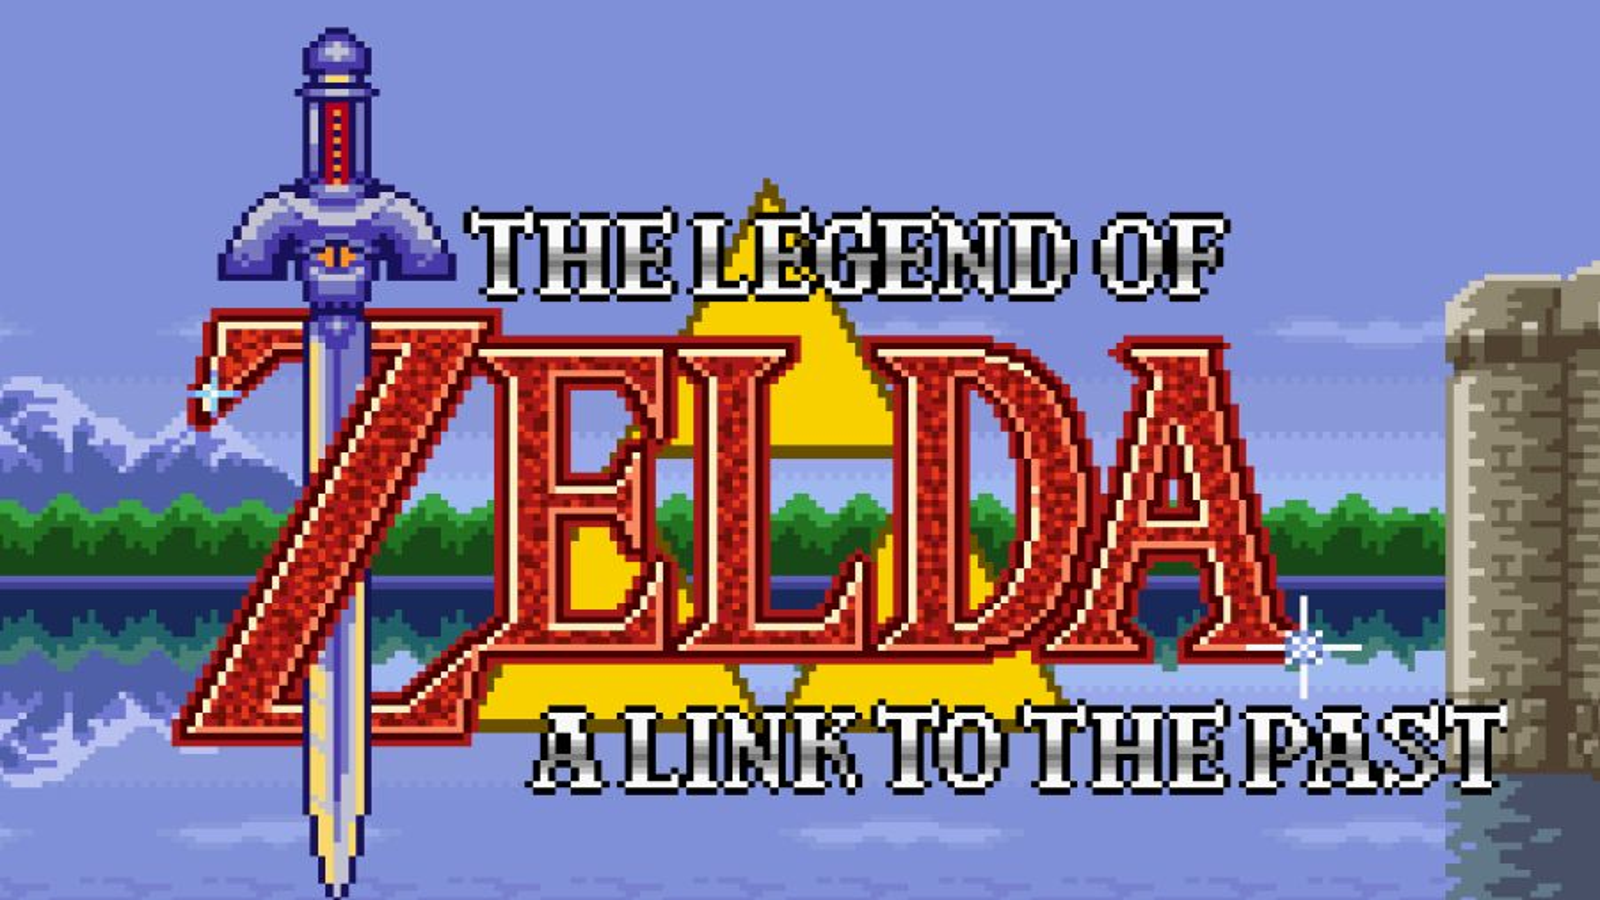 Zelda: A Link To The Past Gets Wii U Virtual Console Trailer - My